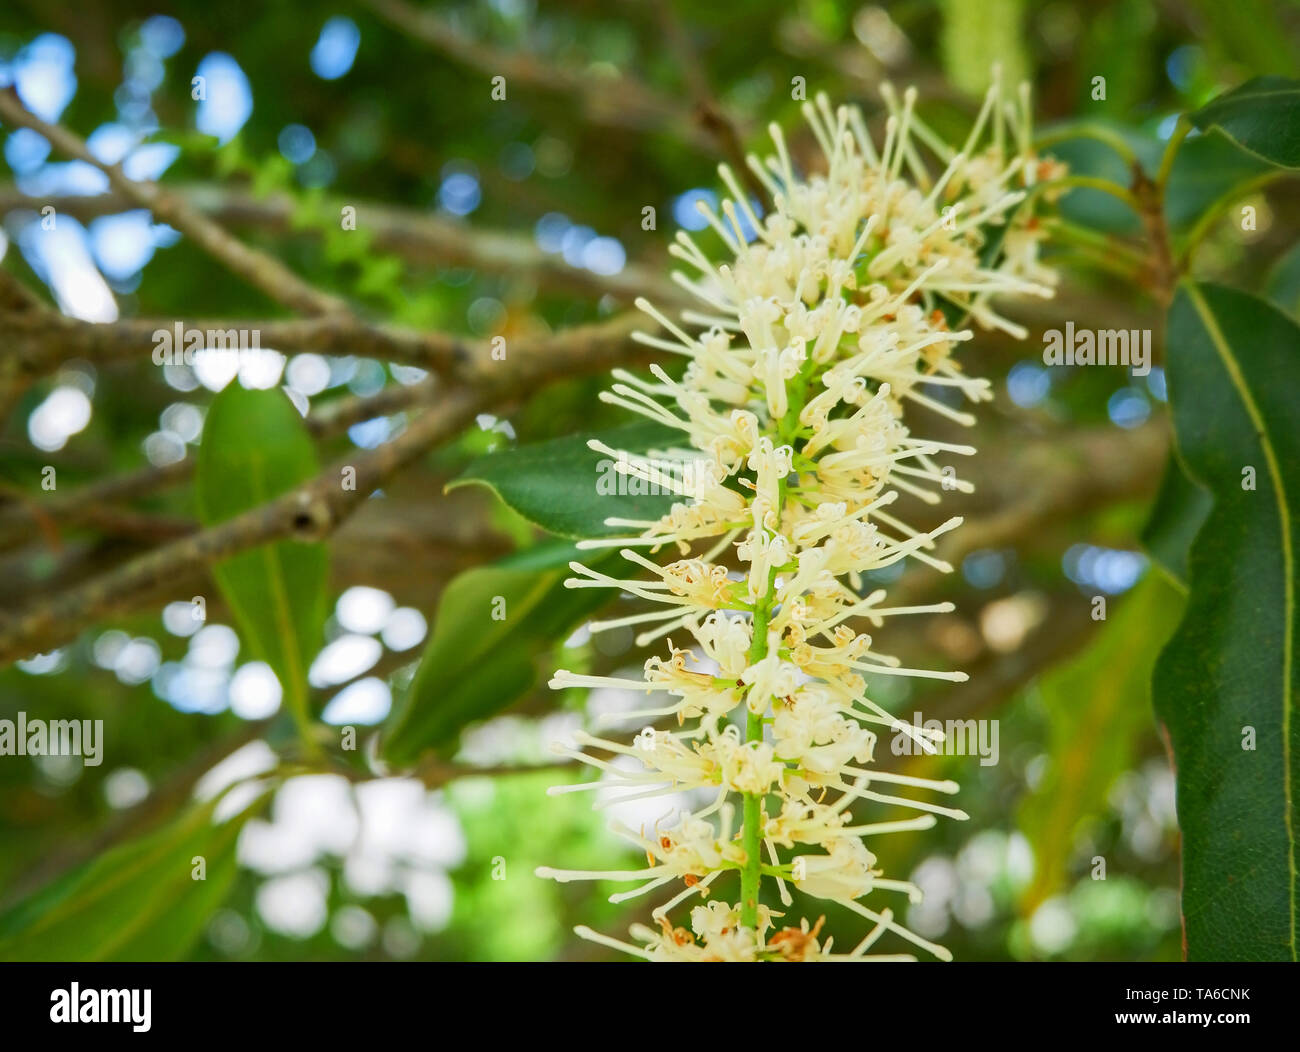 flower macadamia nut hang on tree branch and green leaf macadamia in the garden fruit background Stock Photo